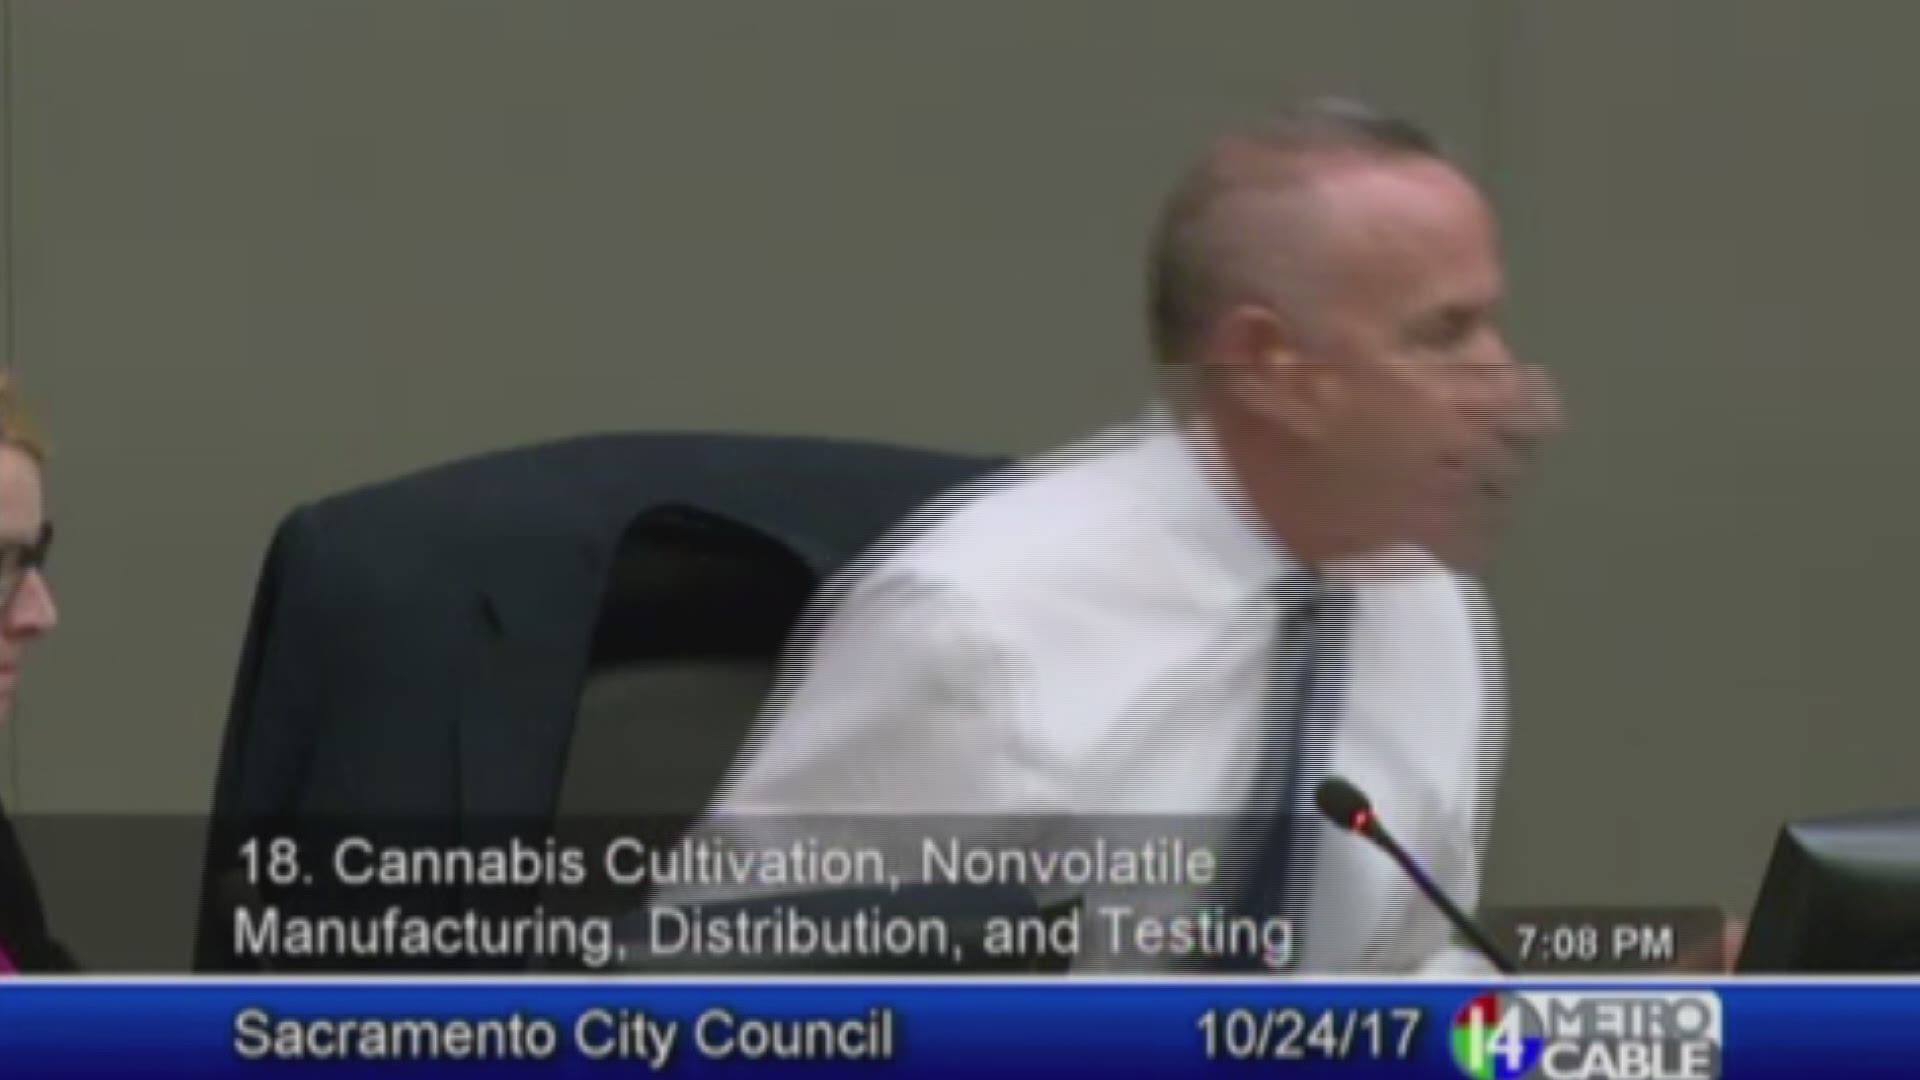 One hot-button issue before Sacramento city council members Tuesday night was cannabis.